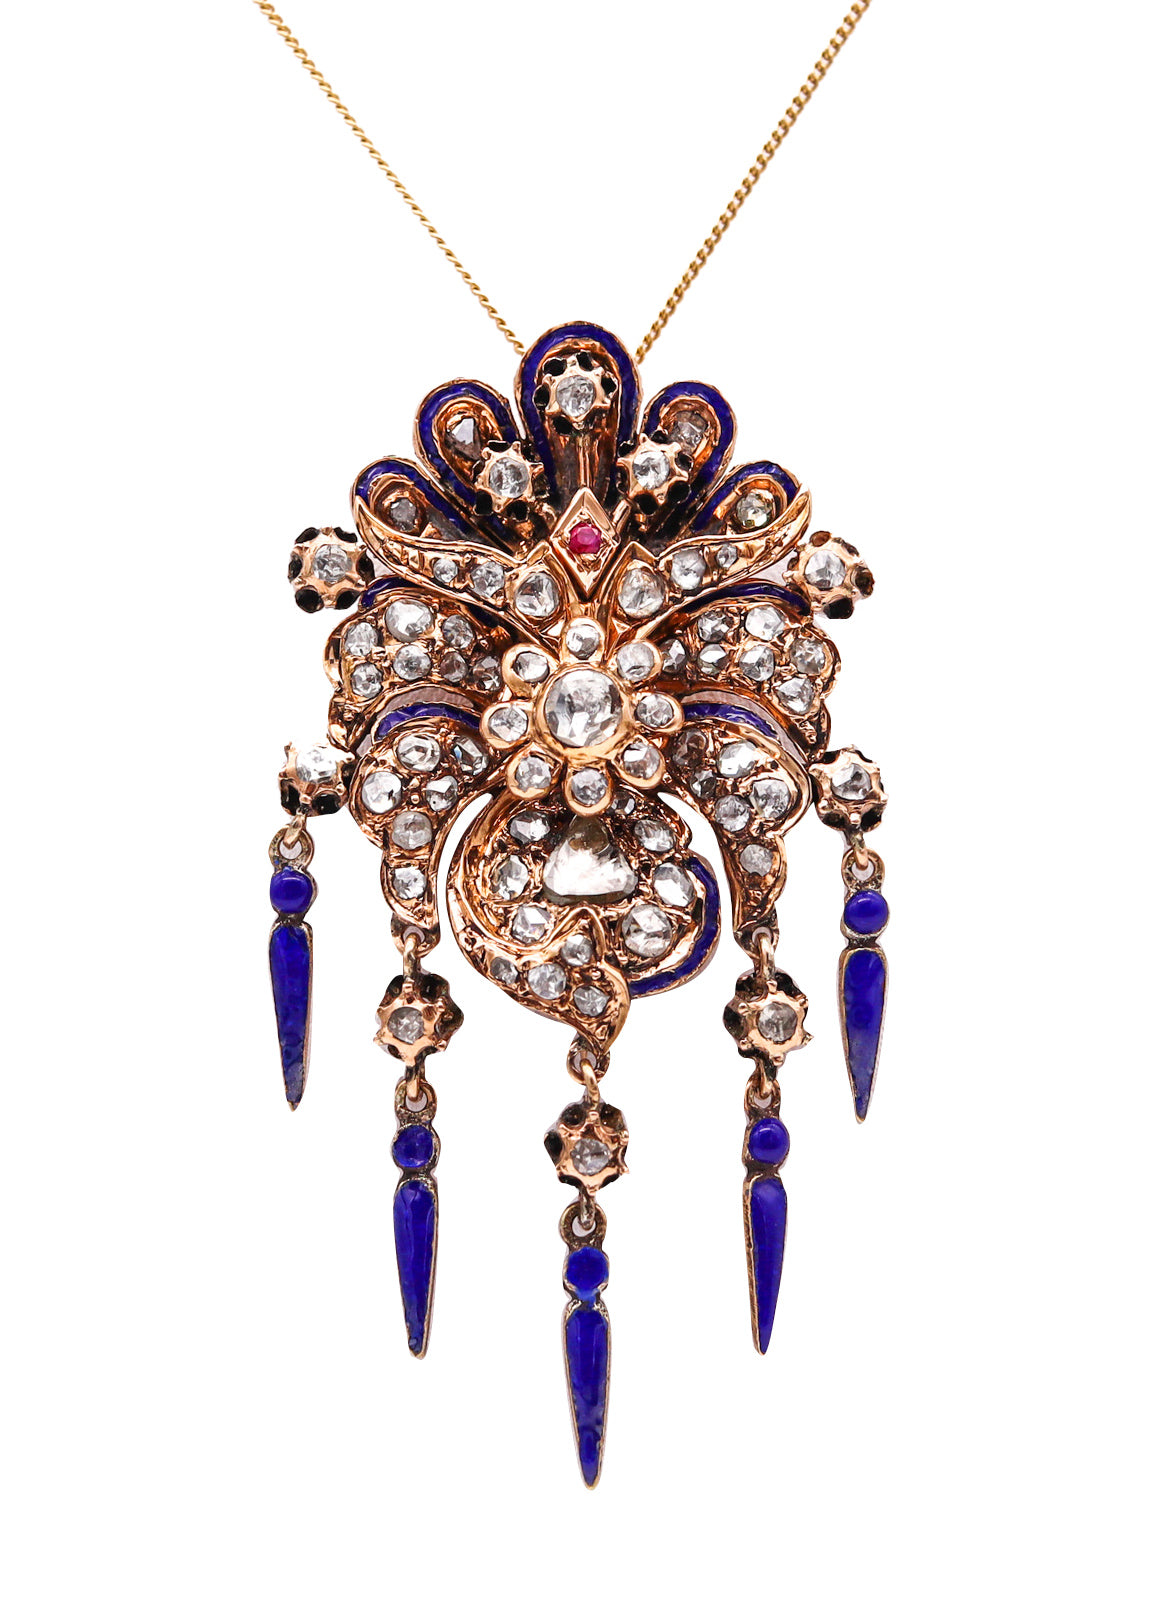 Georgian 1830 Convertible Pendant Brooch In 19Kt Gold With 5.54 Ctw Rose Cut Diamonds